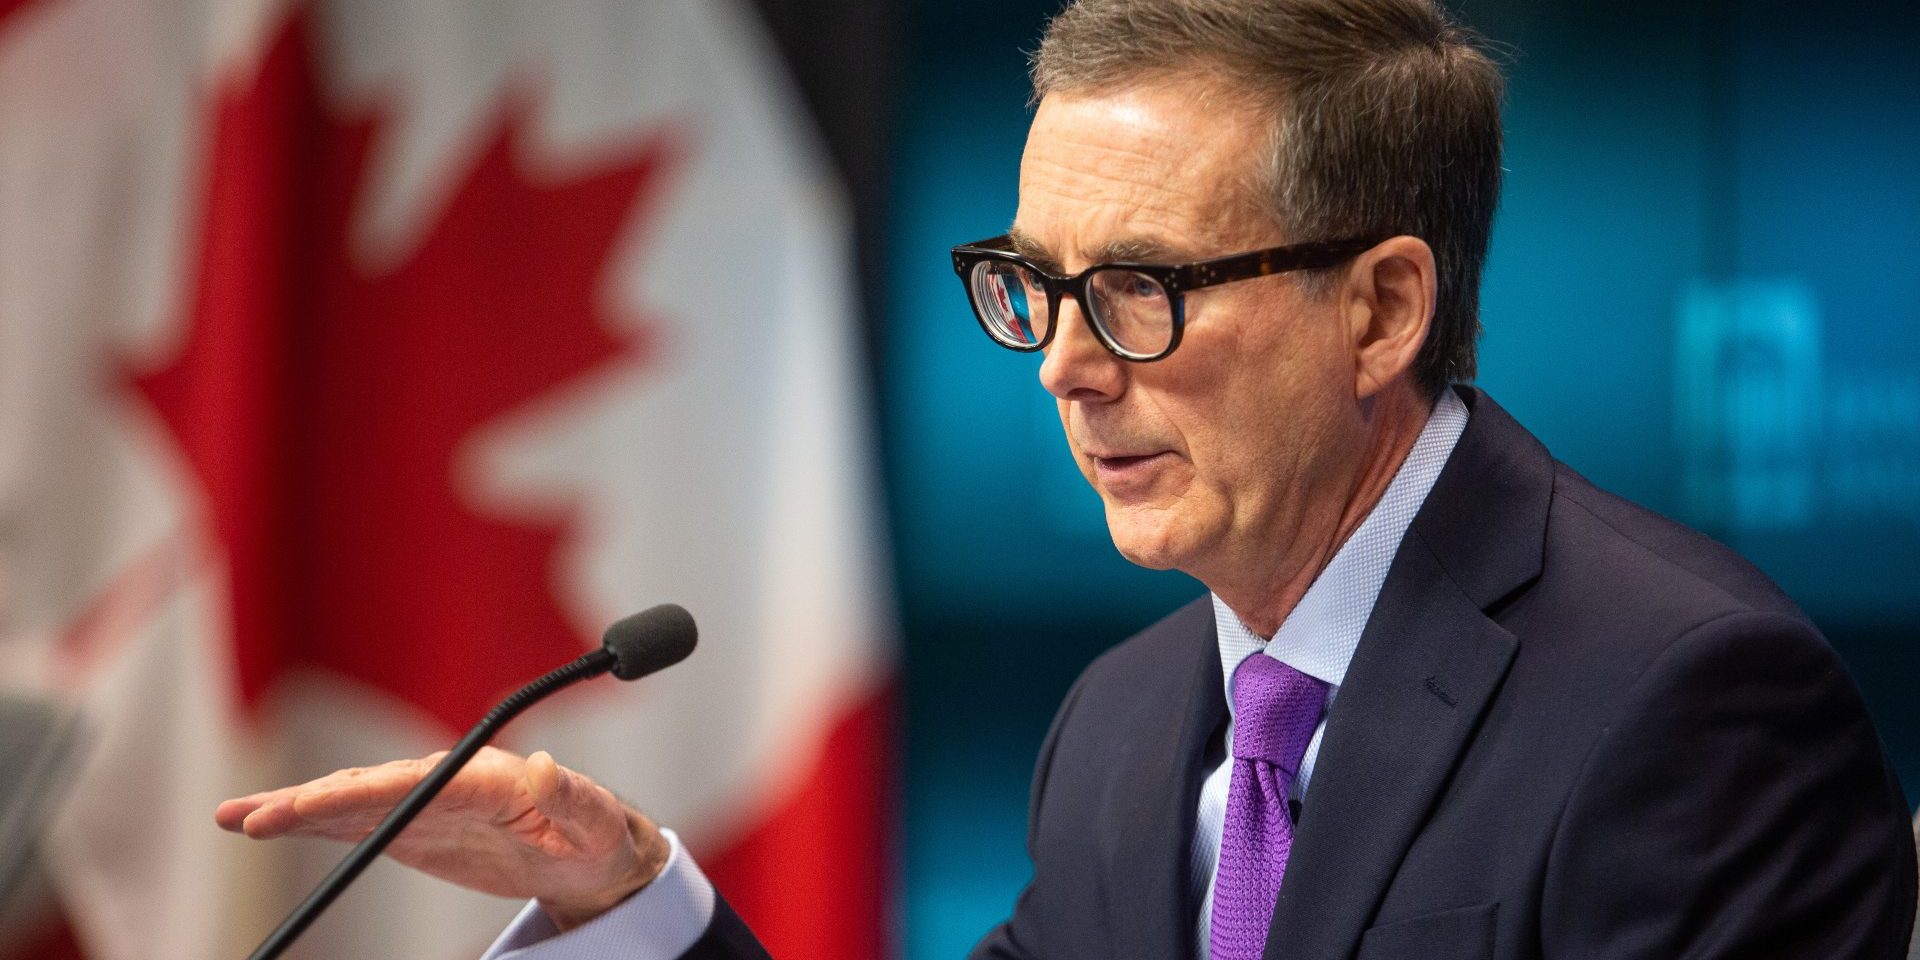 On Jan. 26, Bank of Canada Governor Tiff Macklem announced the central bank was hiking its trend setting interest rate by a quarter point to 4.5 per cent. The Hill Times photograph by Andrew Meade